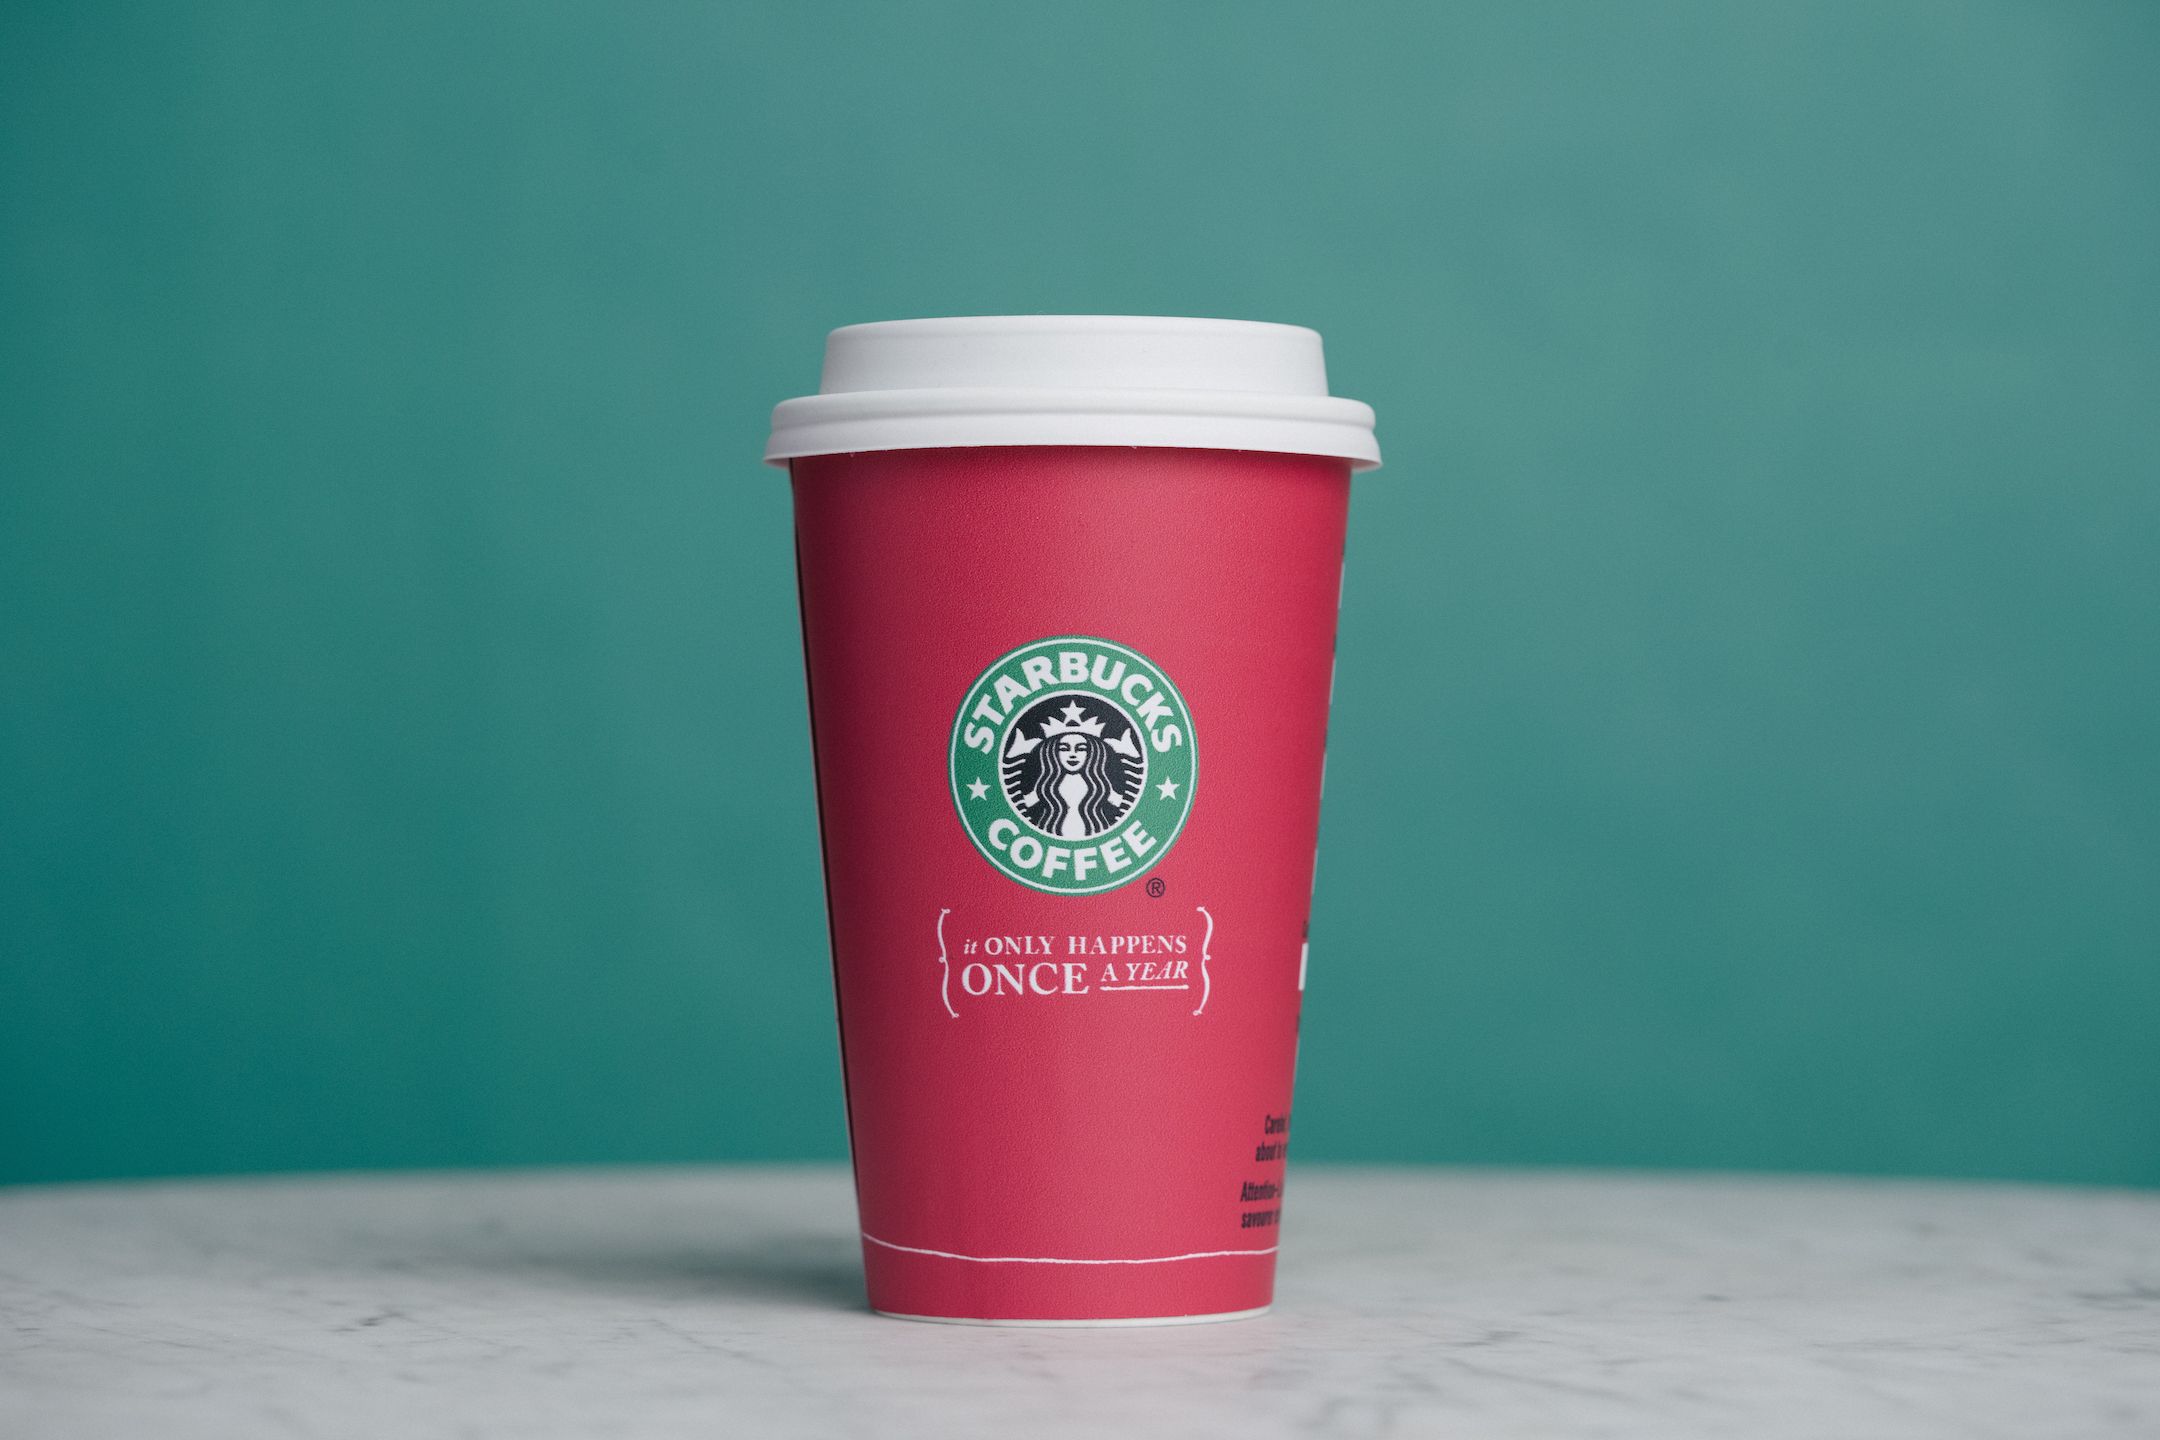 Mini Starbucks Cups -   Starbucks cups, Starbucks party, Coffee party